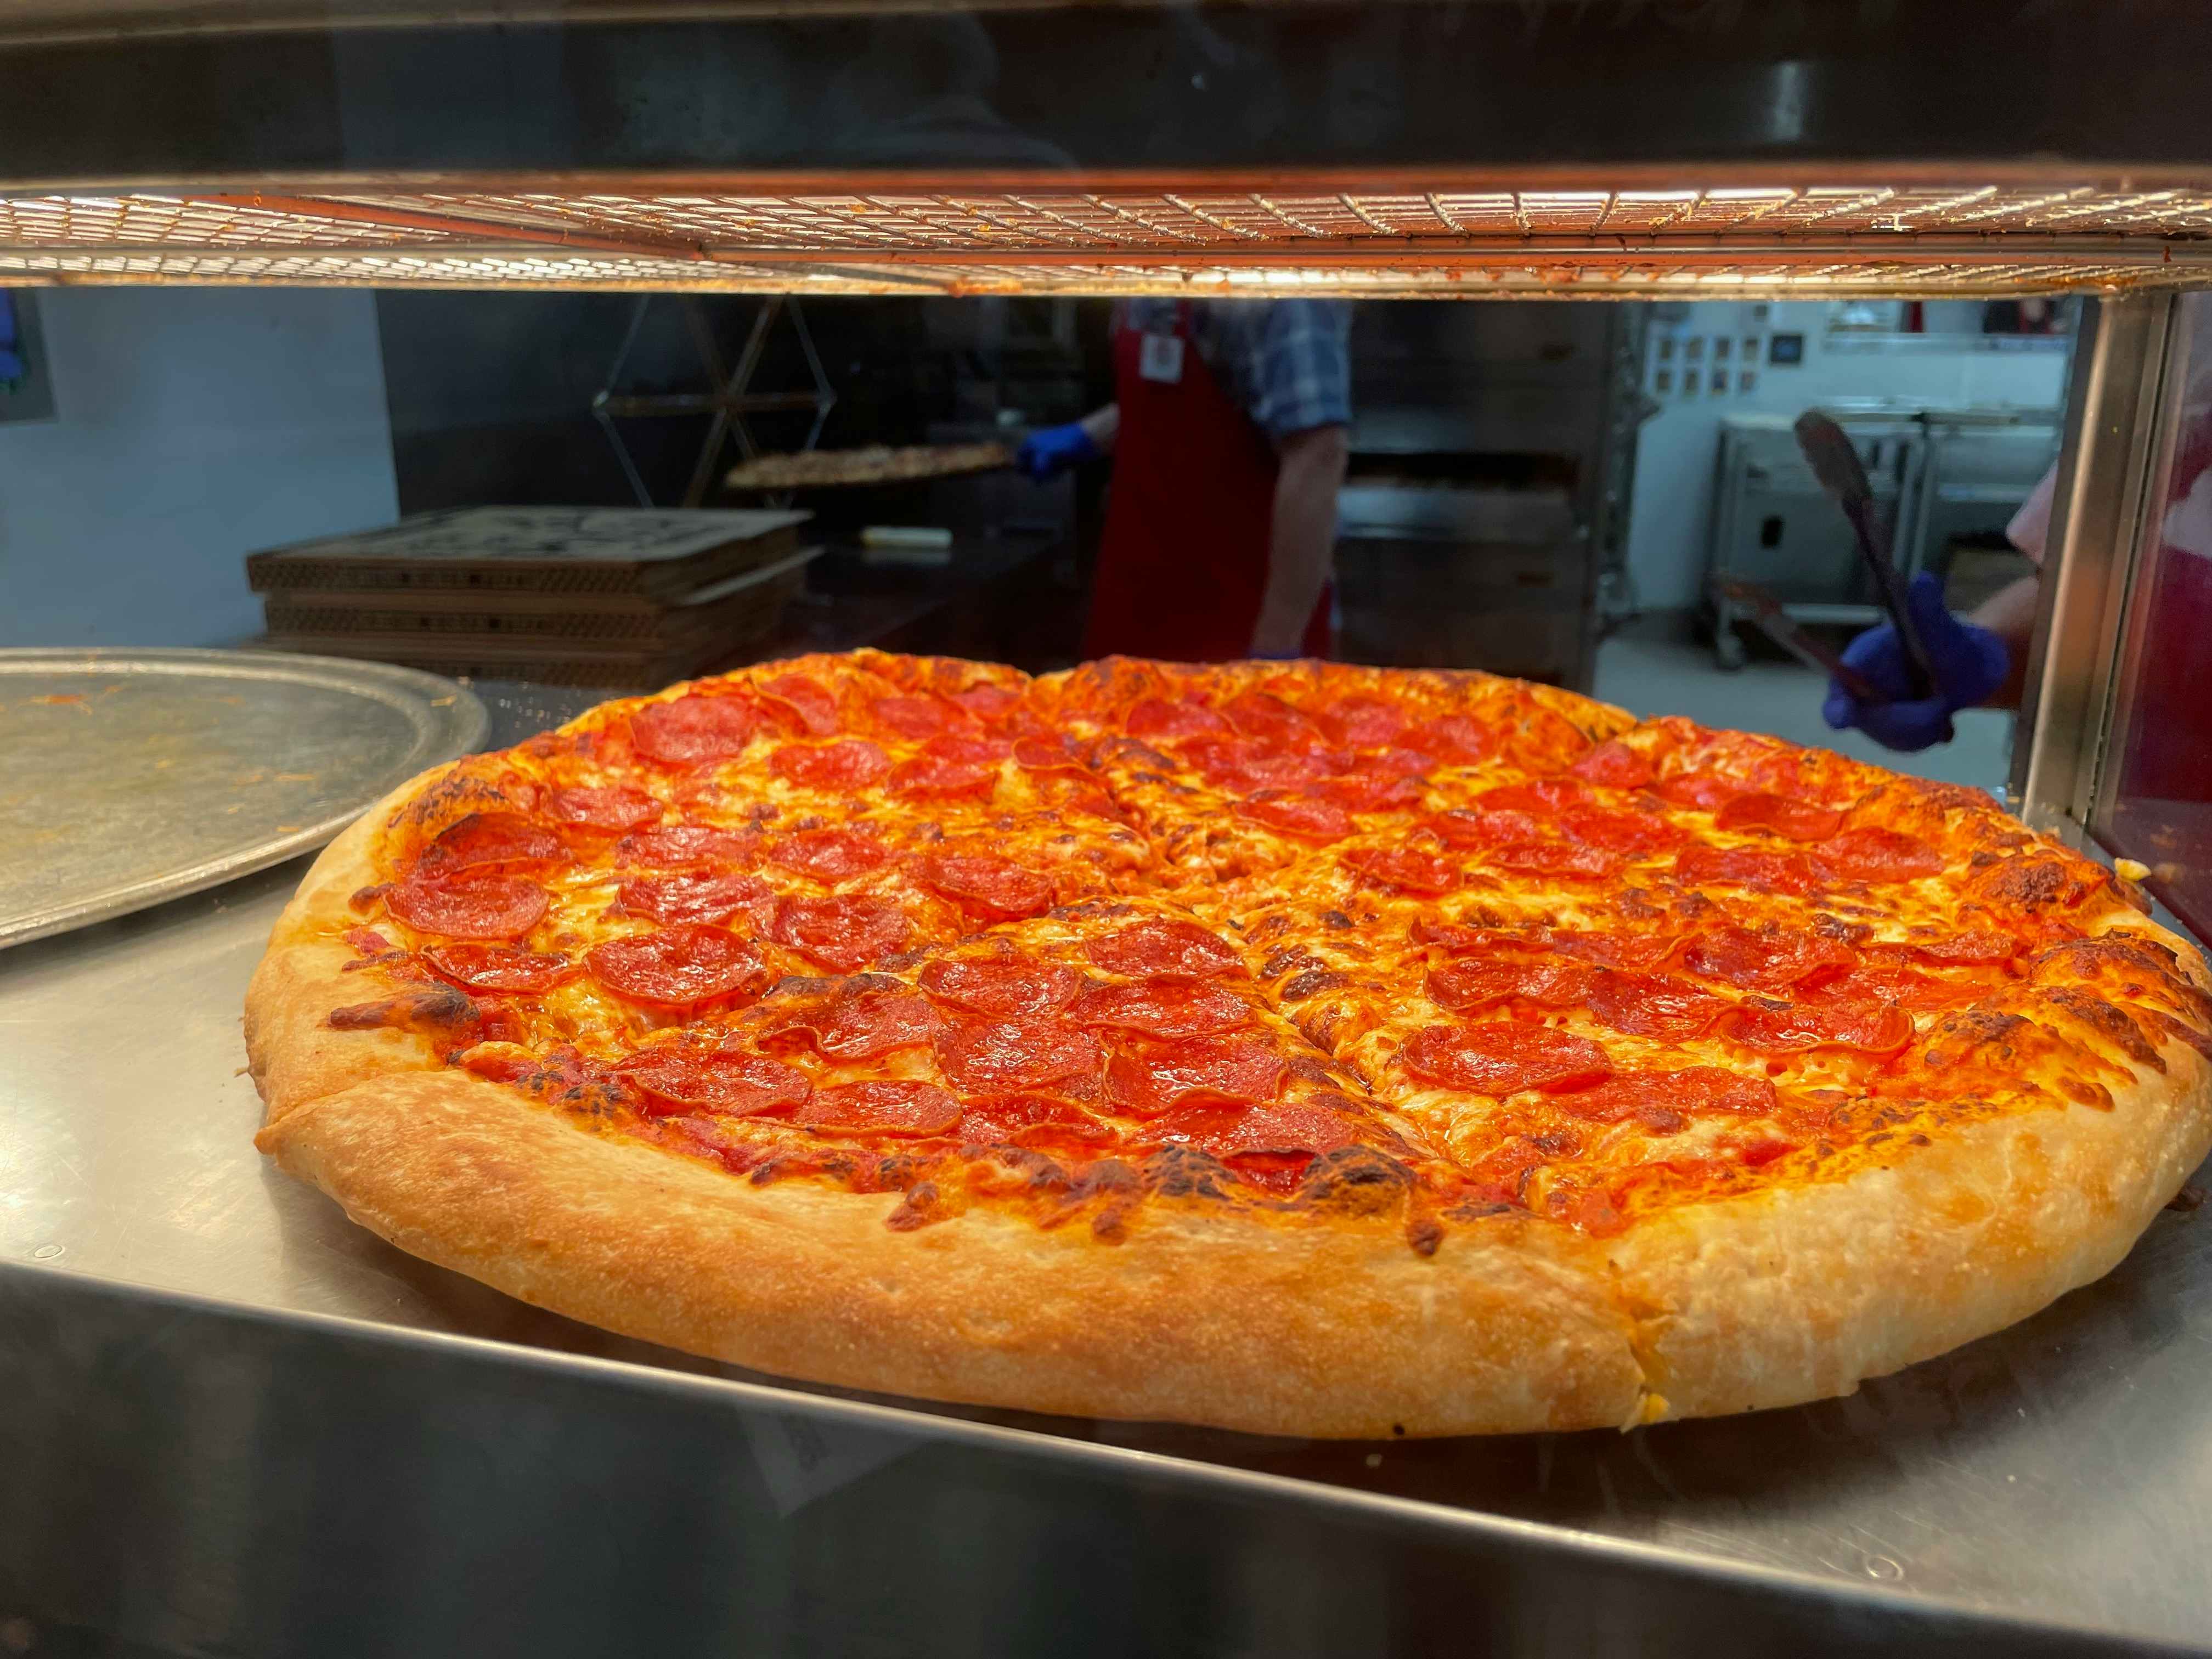 A whole pepperoni pizza on display at the Costco food court